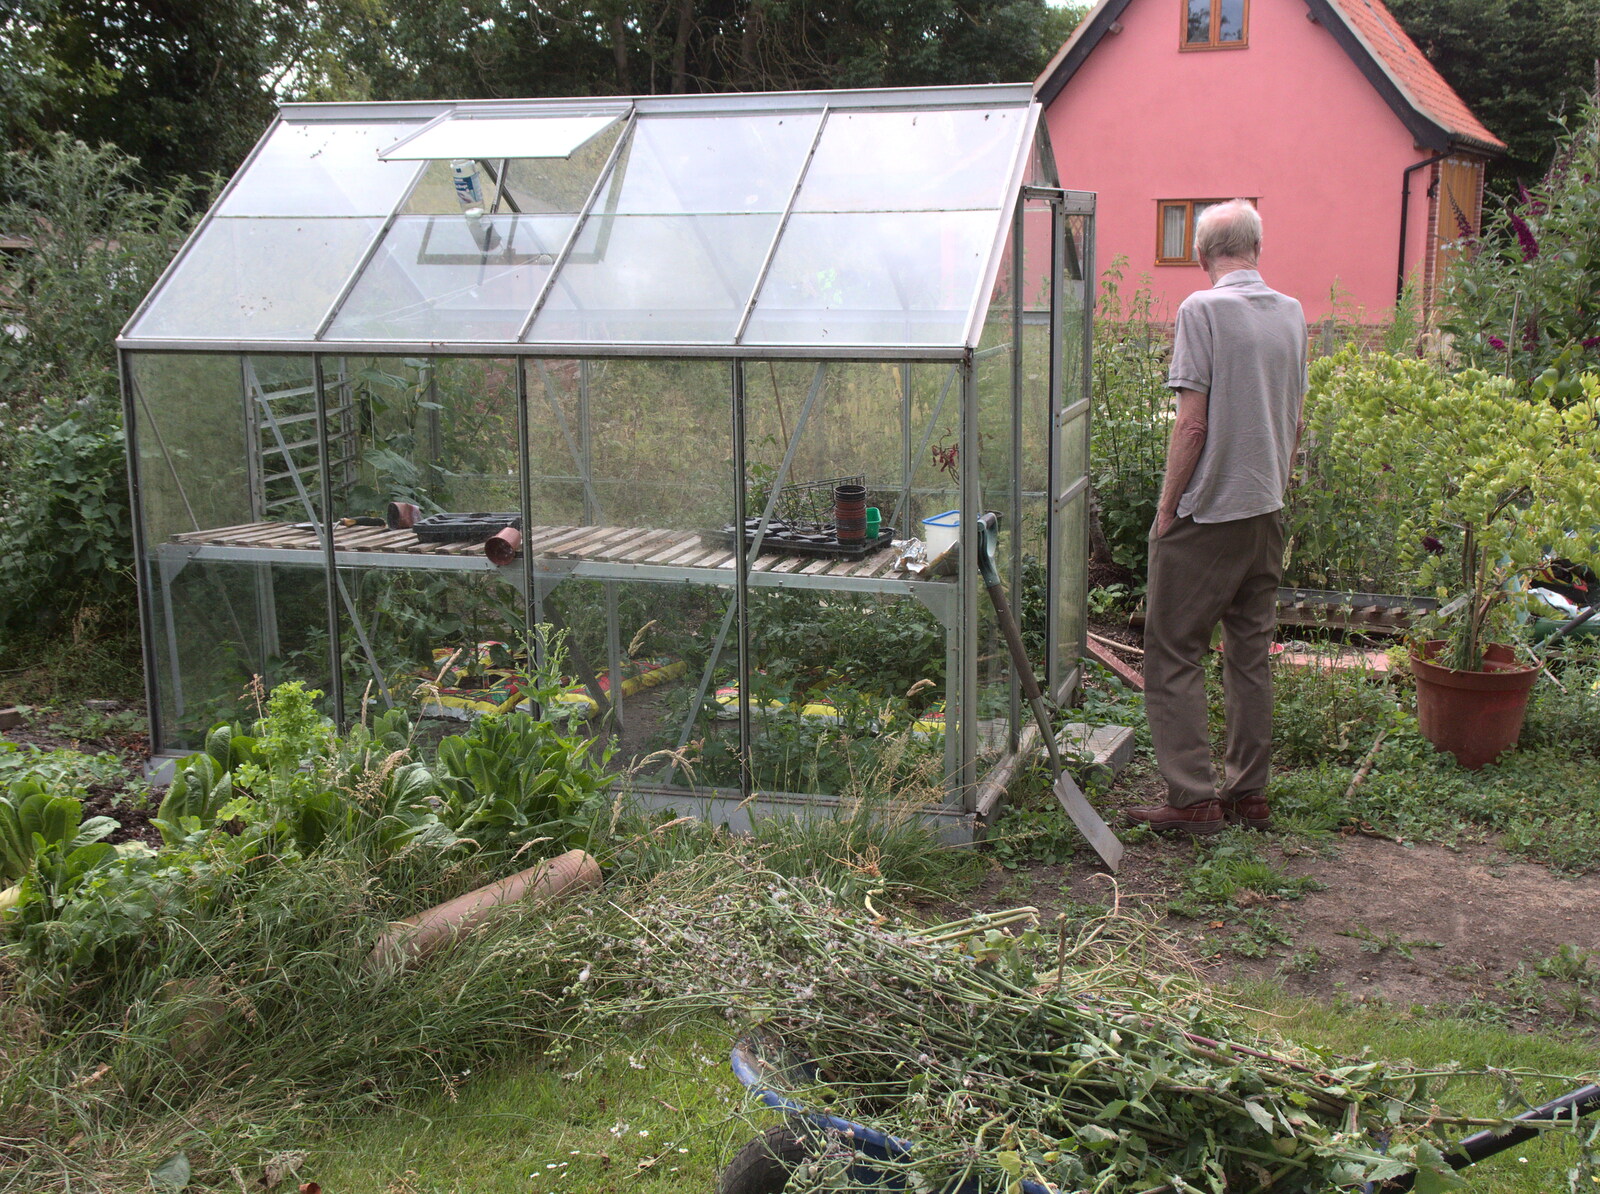 Grandad inspects the greenhouse from The Real Last Night of the Swan Inn, Brome, Suffolk - 24th June 2017